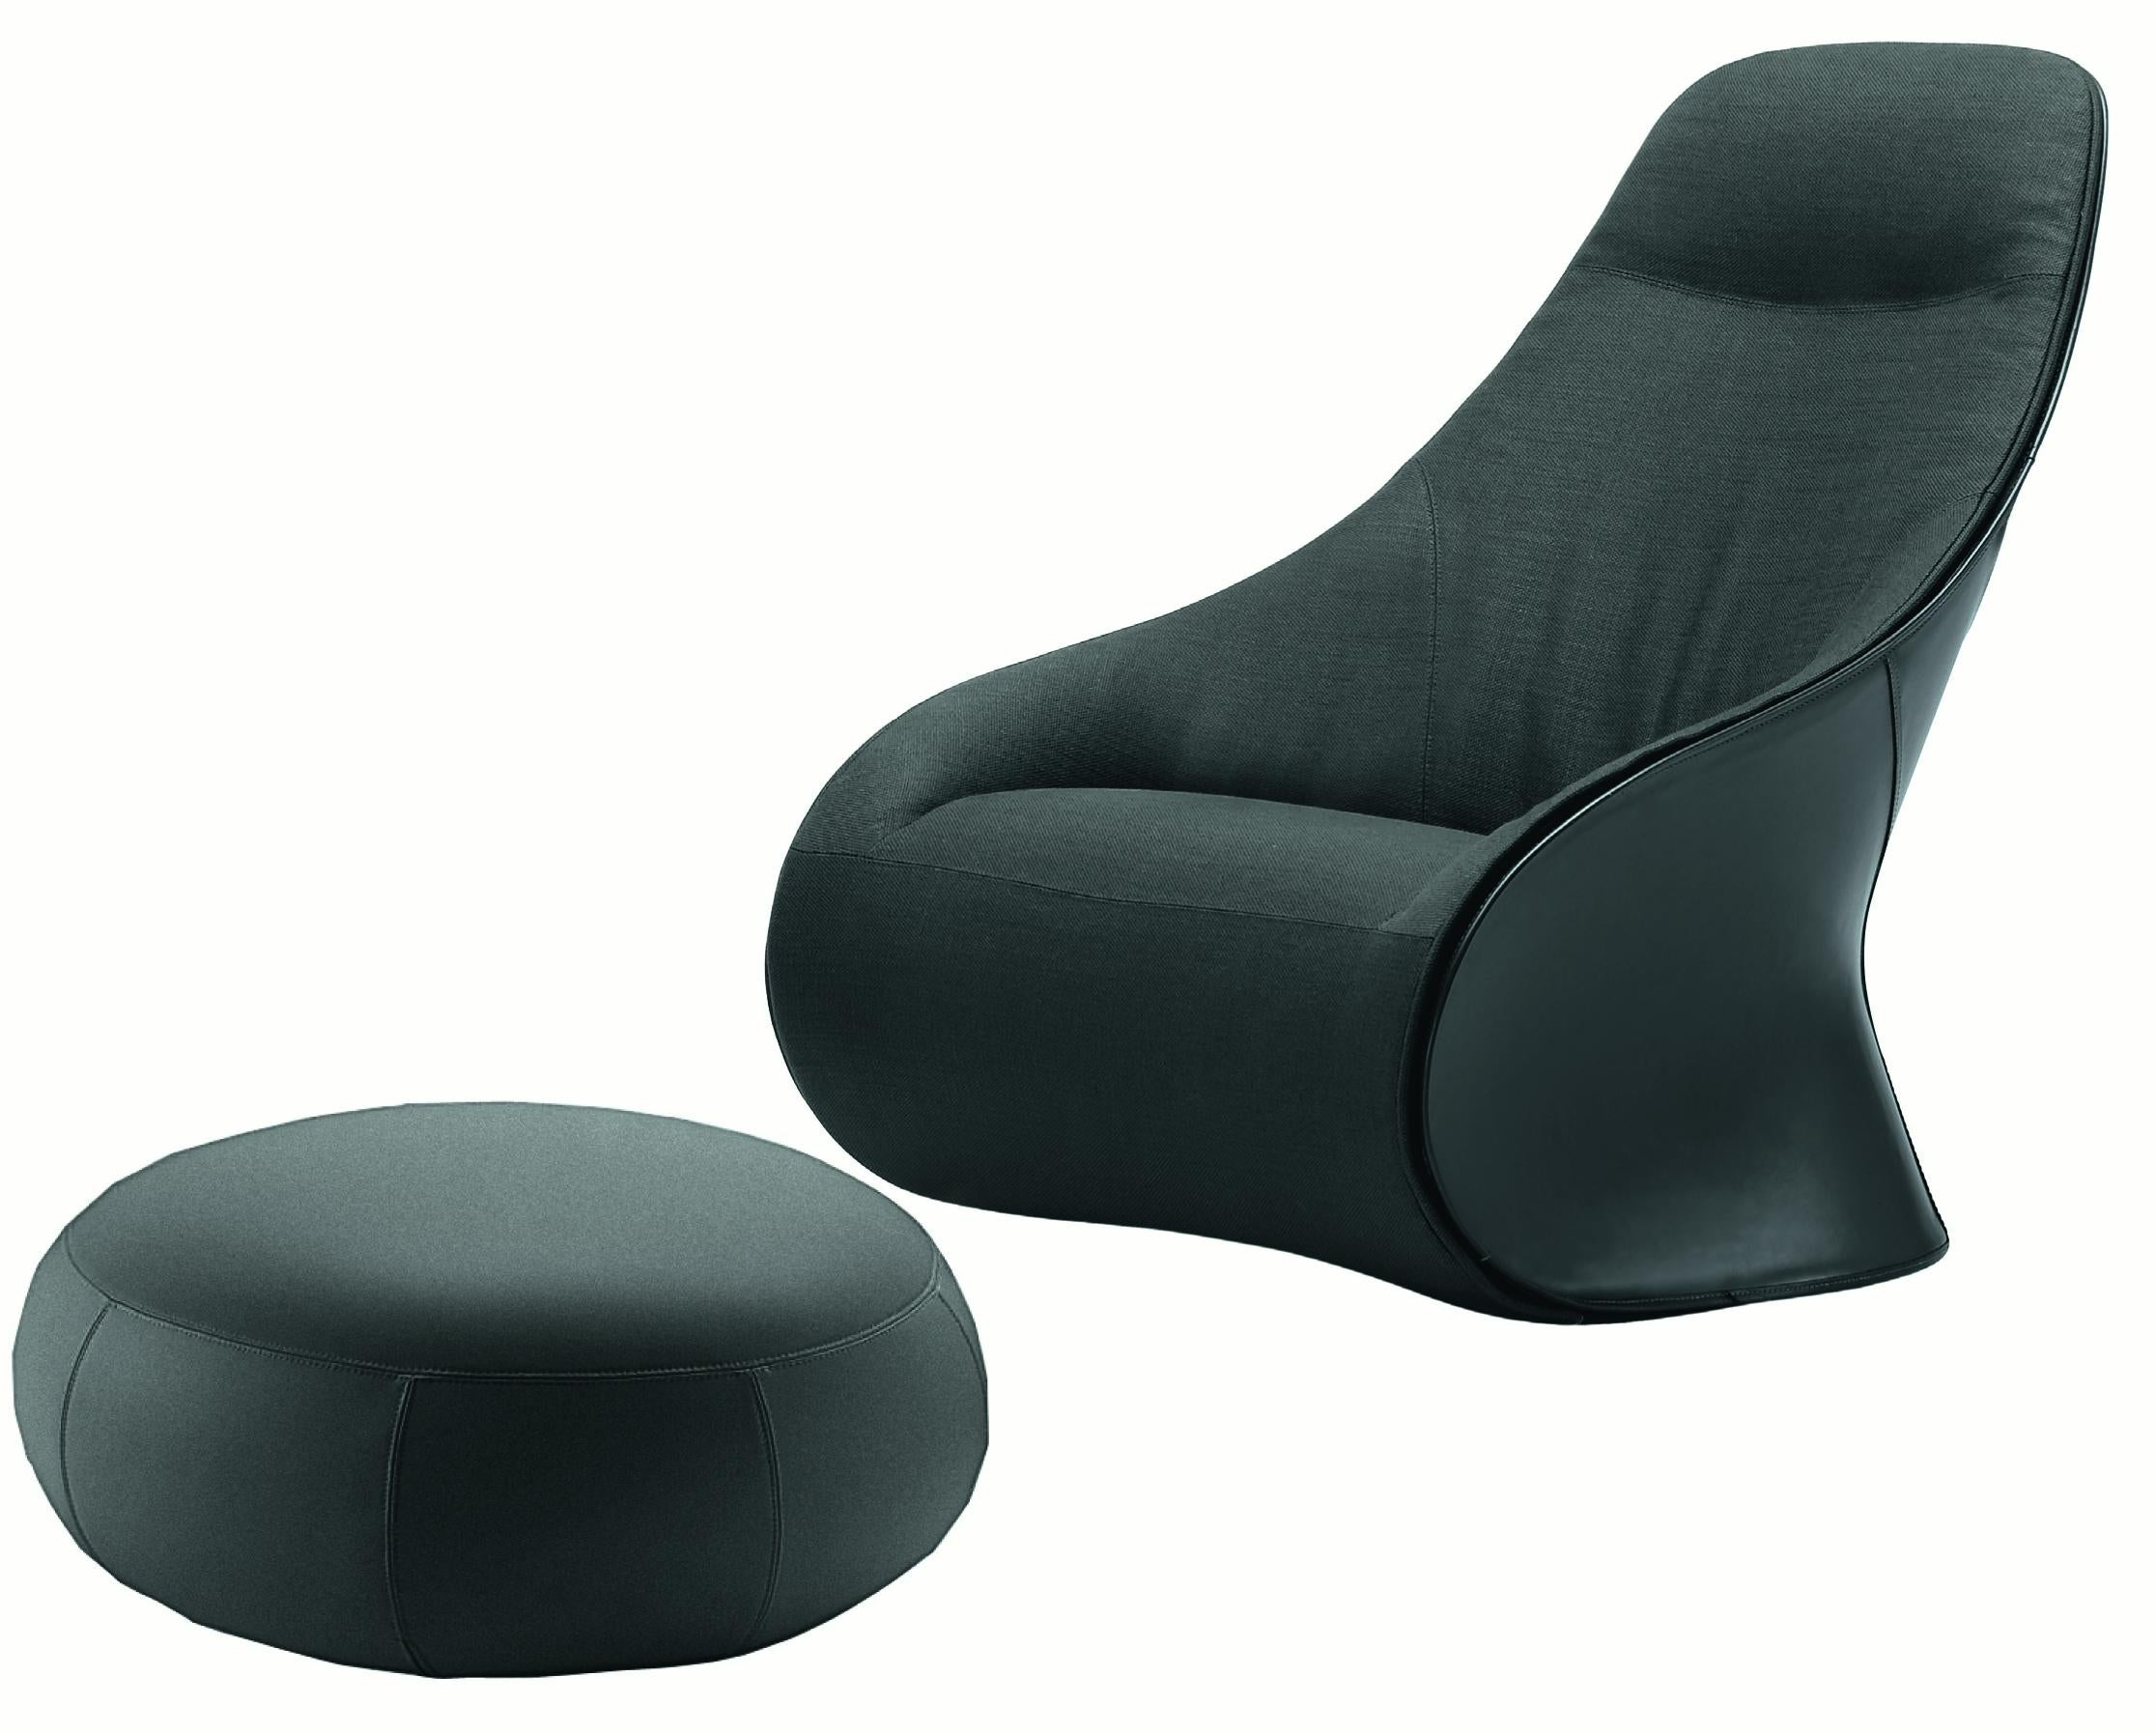 Zanotta Derby Armchair with Pouf in Black Upholstery by Noé Duchaufour Lawrance

Swivel steel base, or fixed with feet. Stiff polyurethane external body covered with cowhide 95. Cannot be covered with cowhide 95 in the shade white 0704. Internal